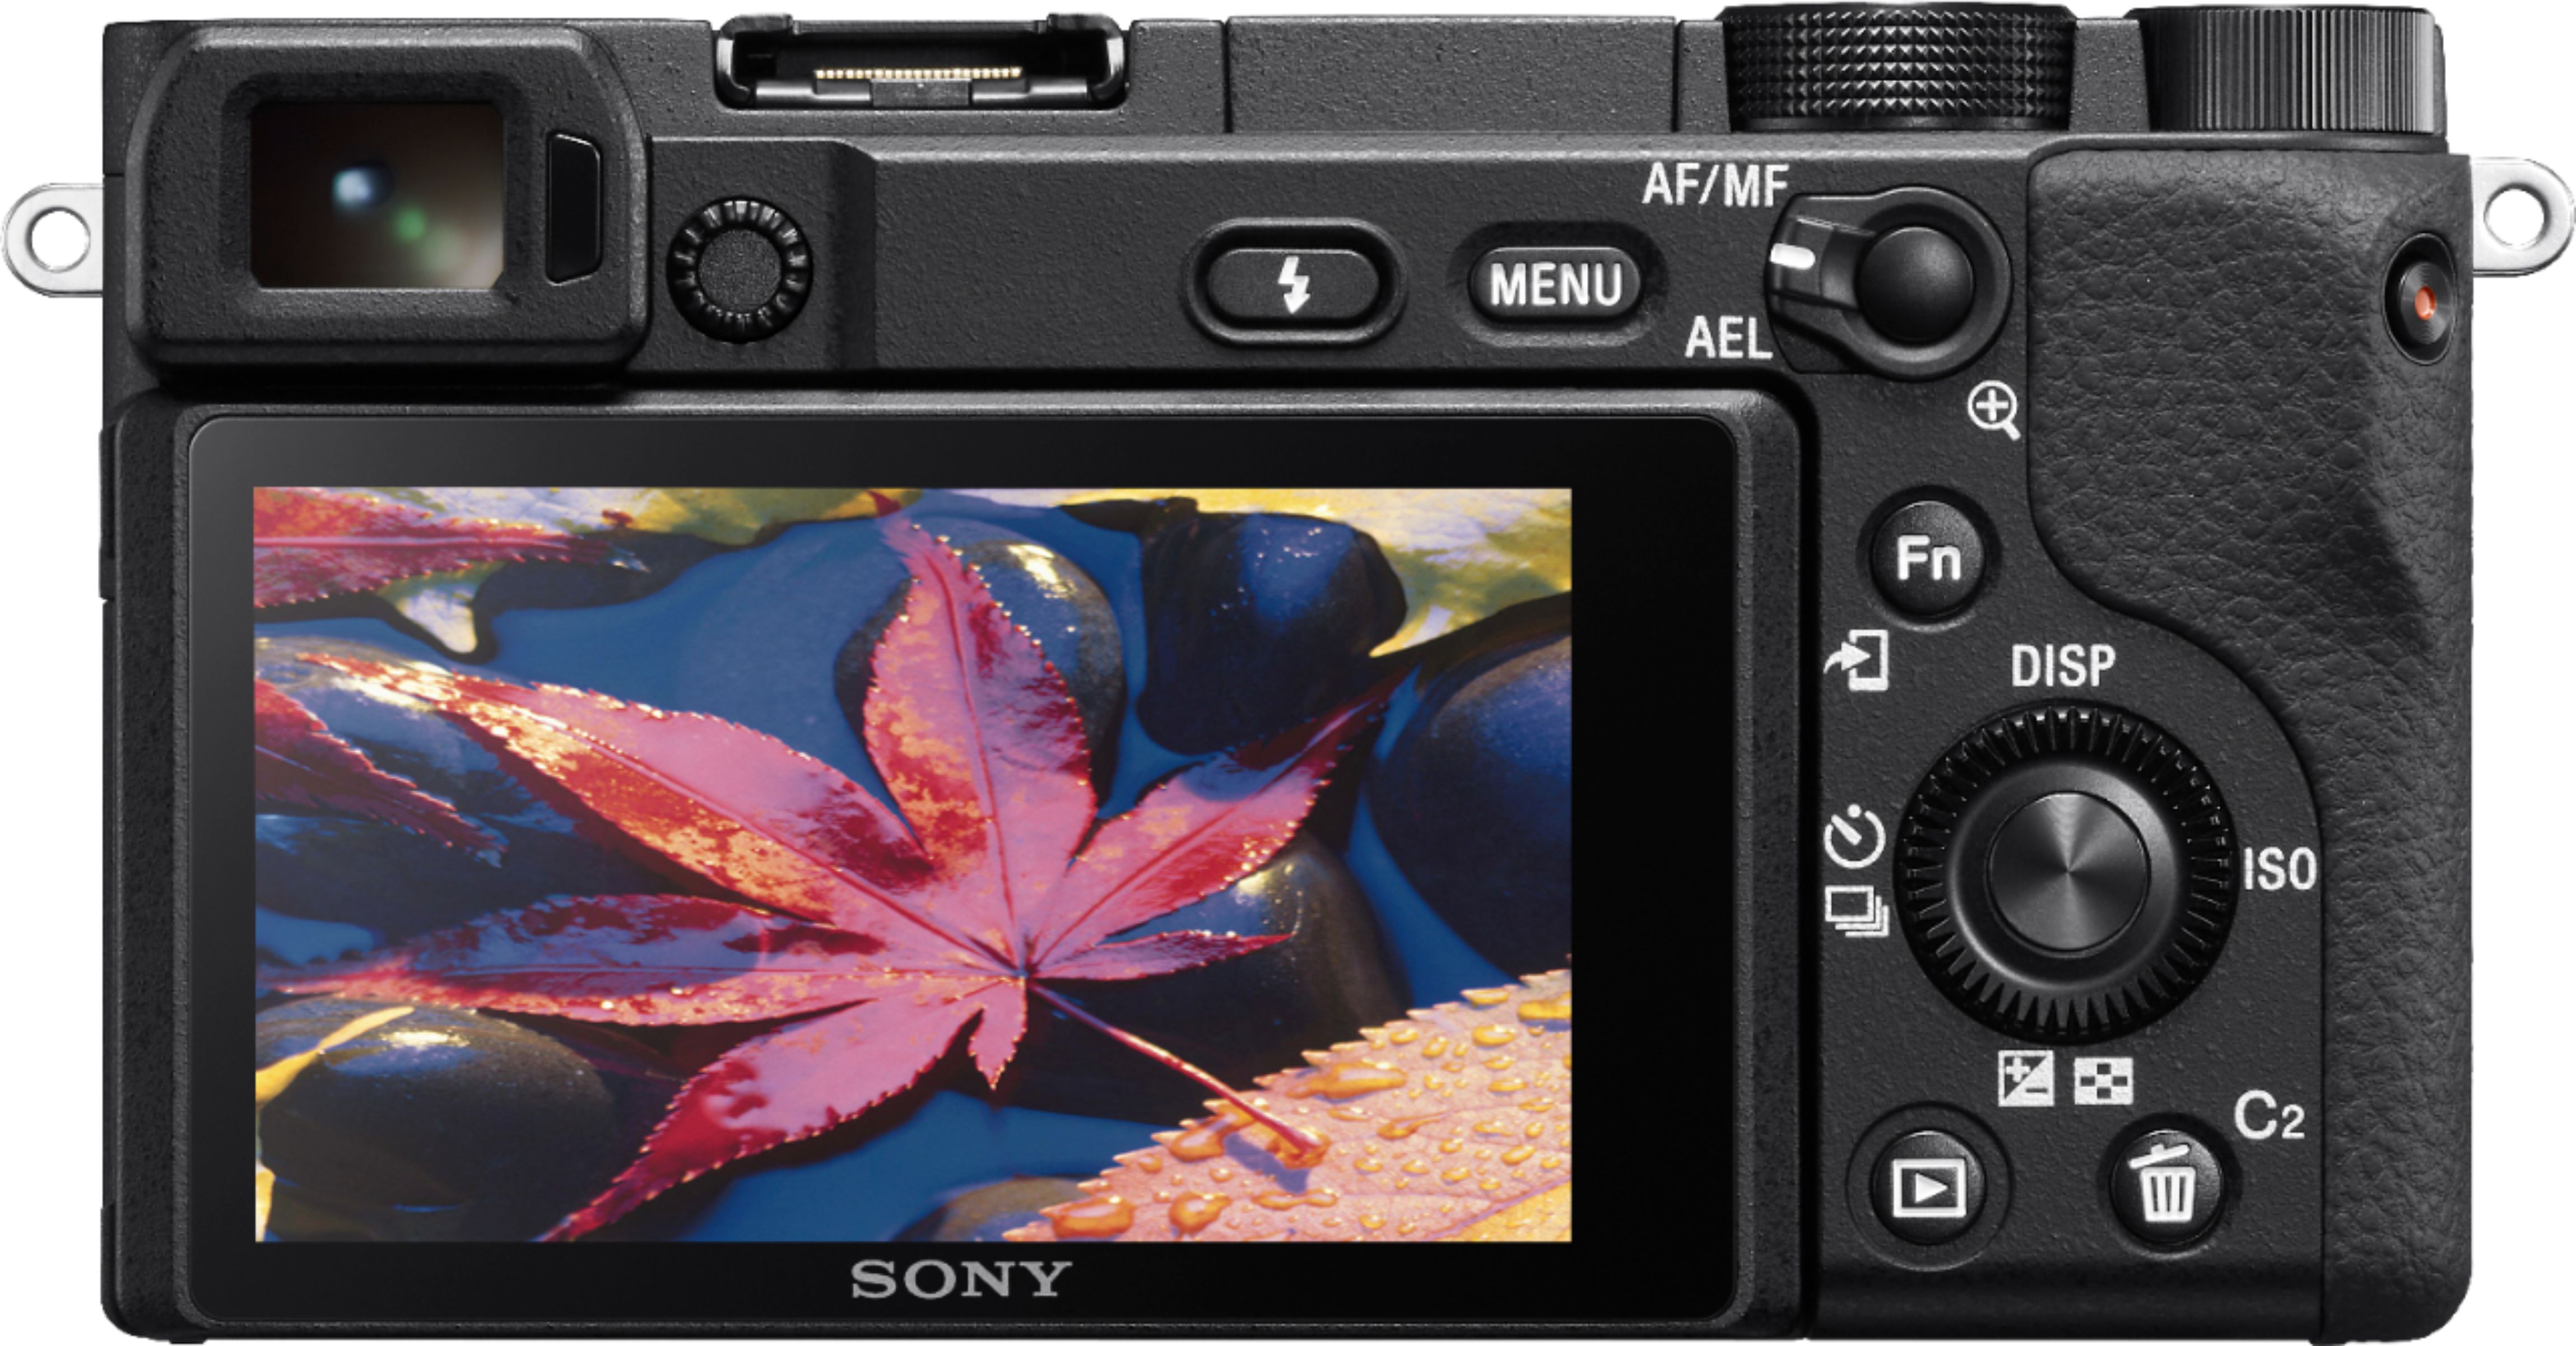 Back View: Sony a6400 ILCE-6400 - Digital camera - mirrorless - 24.2 MP - APS-C - 4K / 30 fps - body only - Wi-Fi, NFC, Bluetooth - black